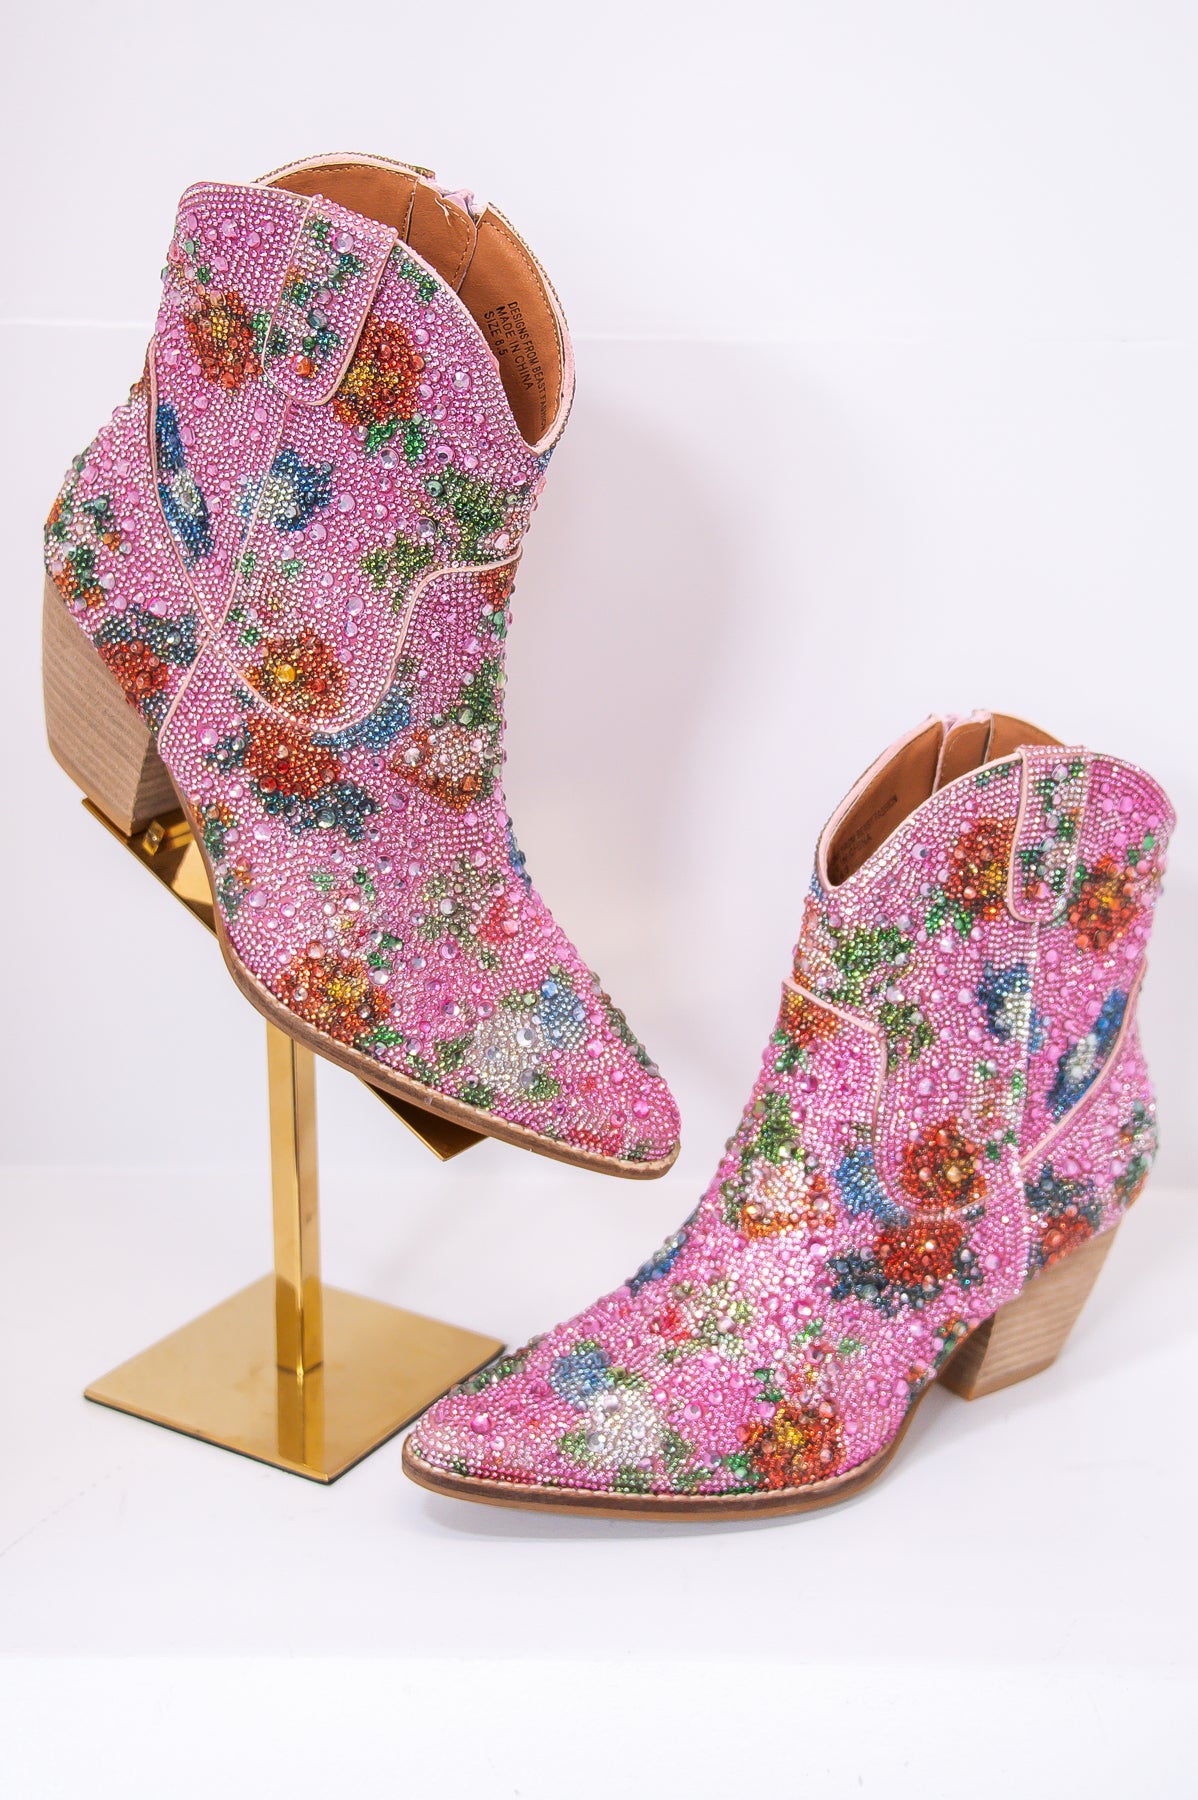 New Cowgirl In Town Pink/Multi Color Floral Bling Cowgirl Booties - SHO2658PK